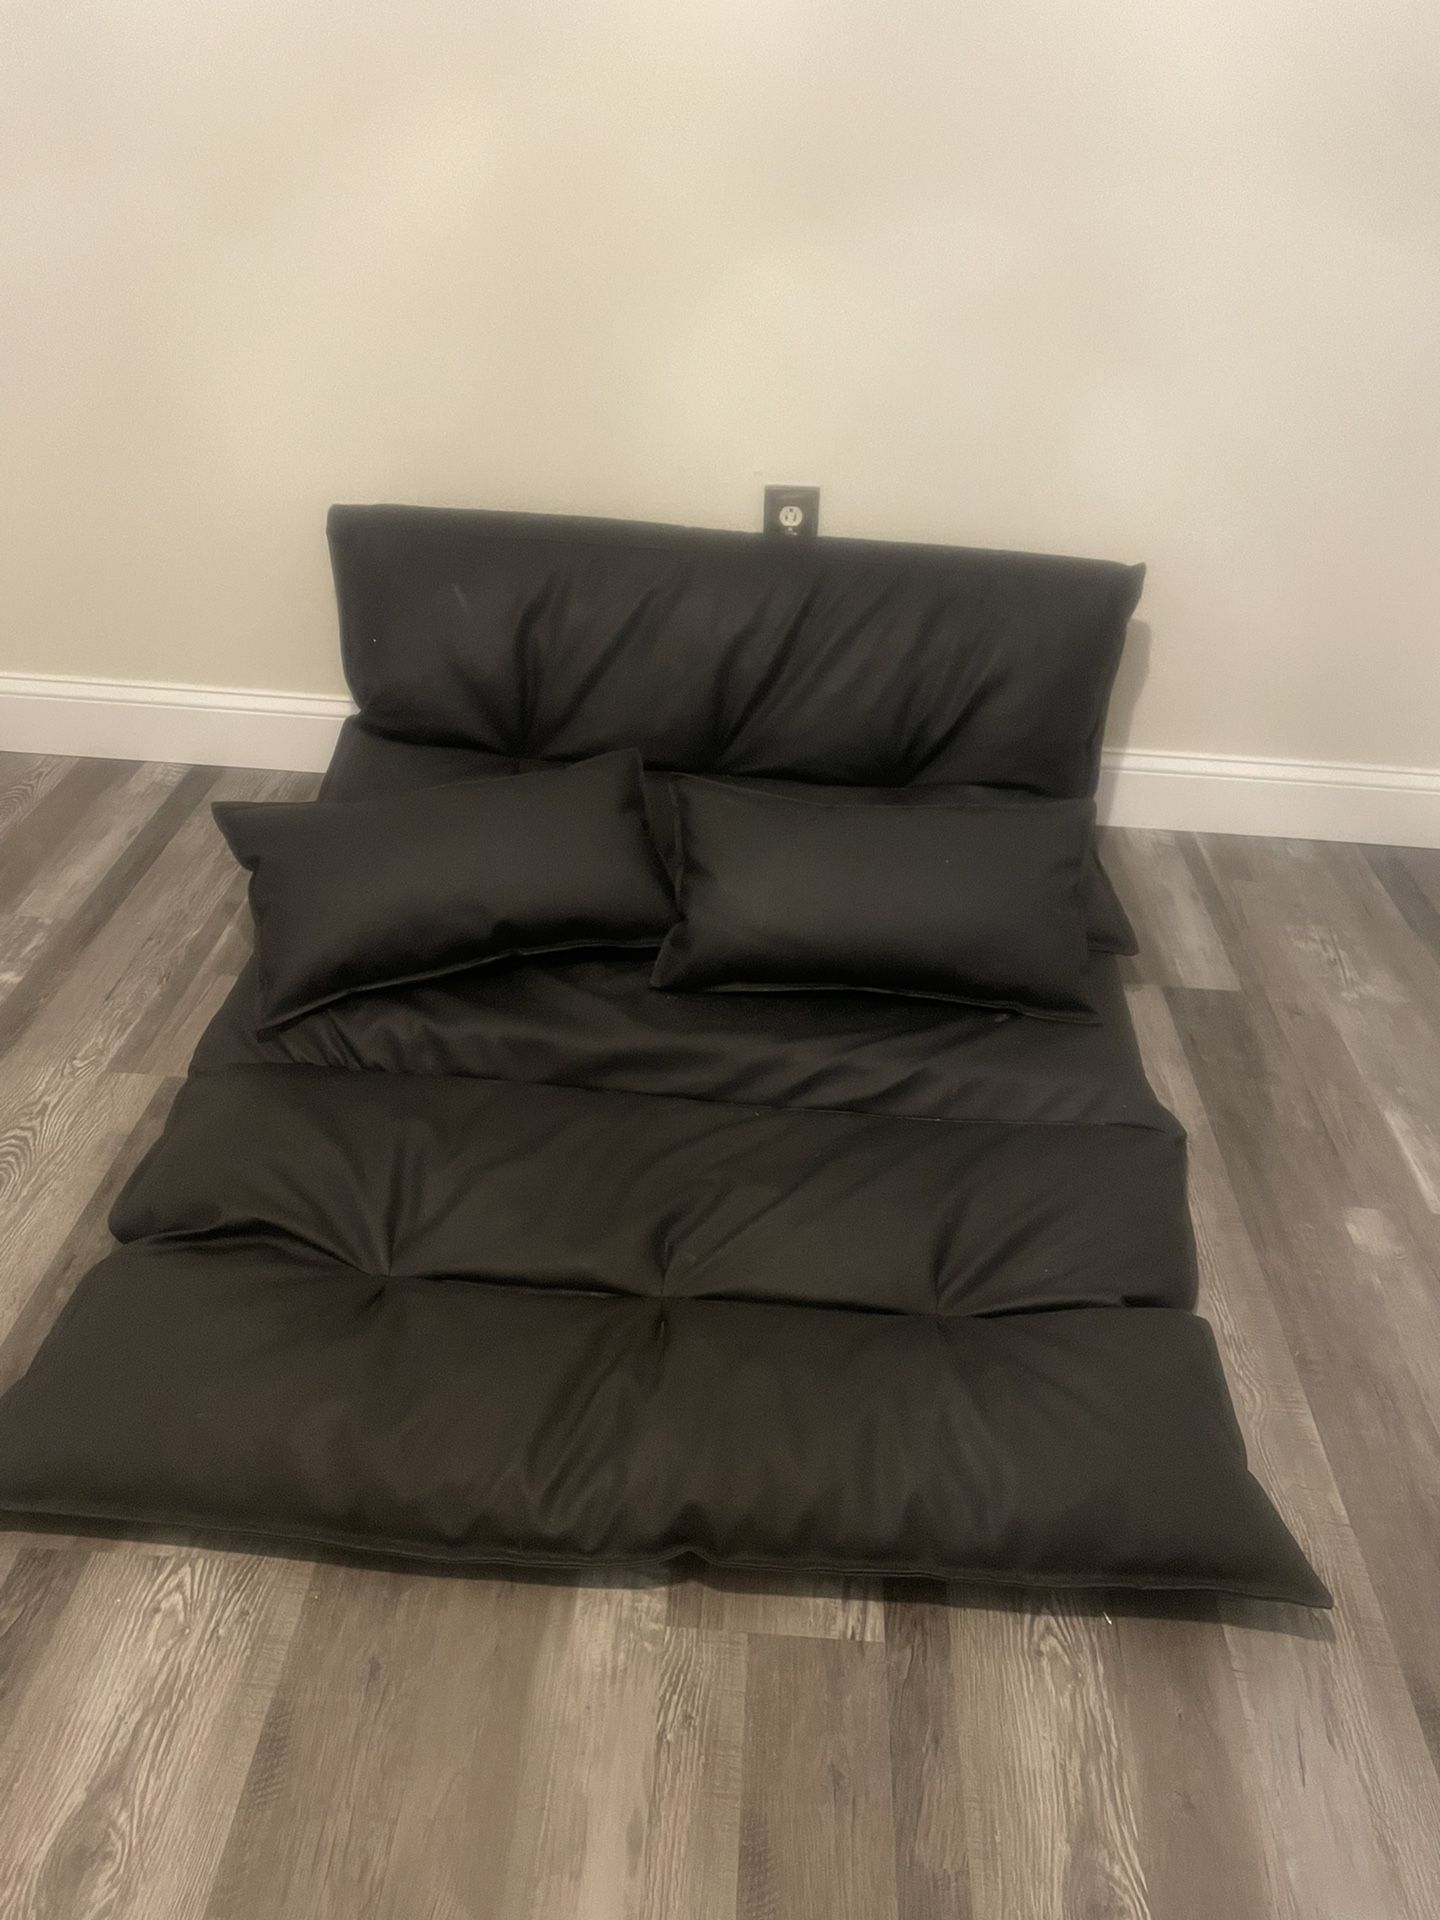 Floor Couch/Convertible Sofa Bed